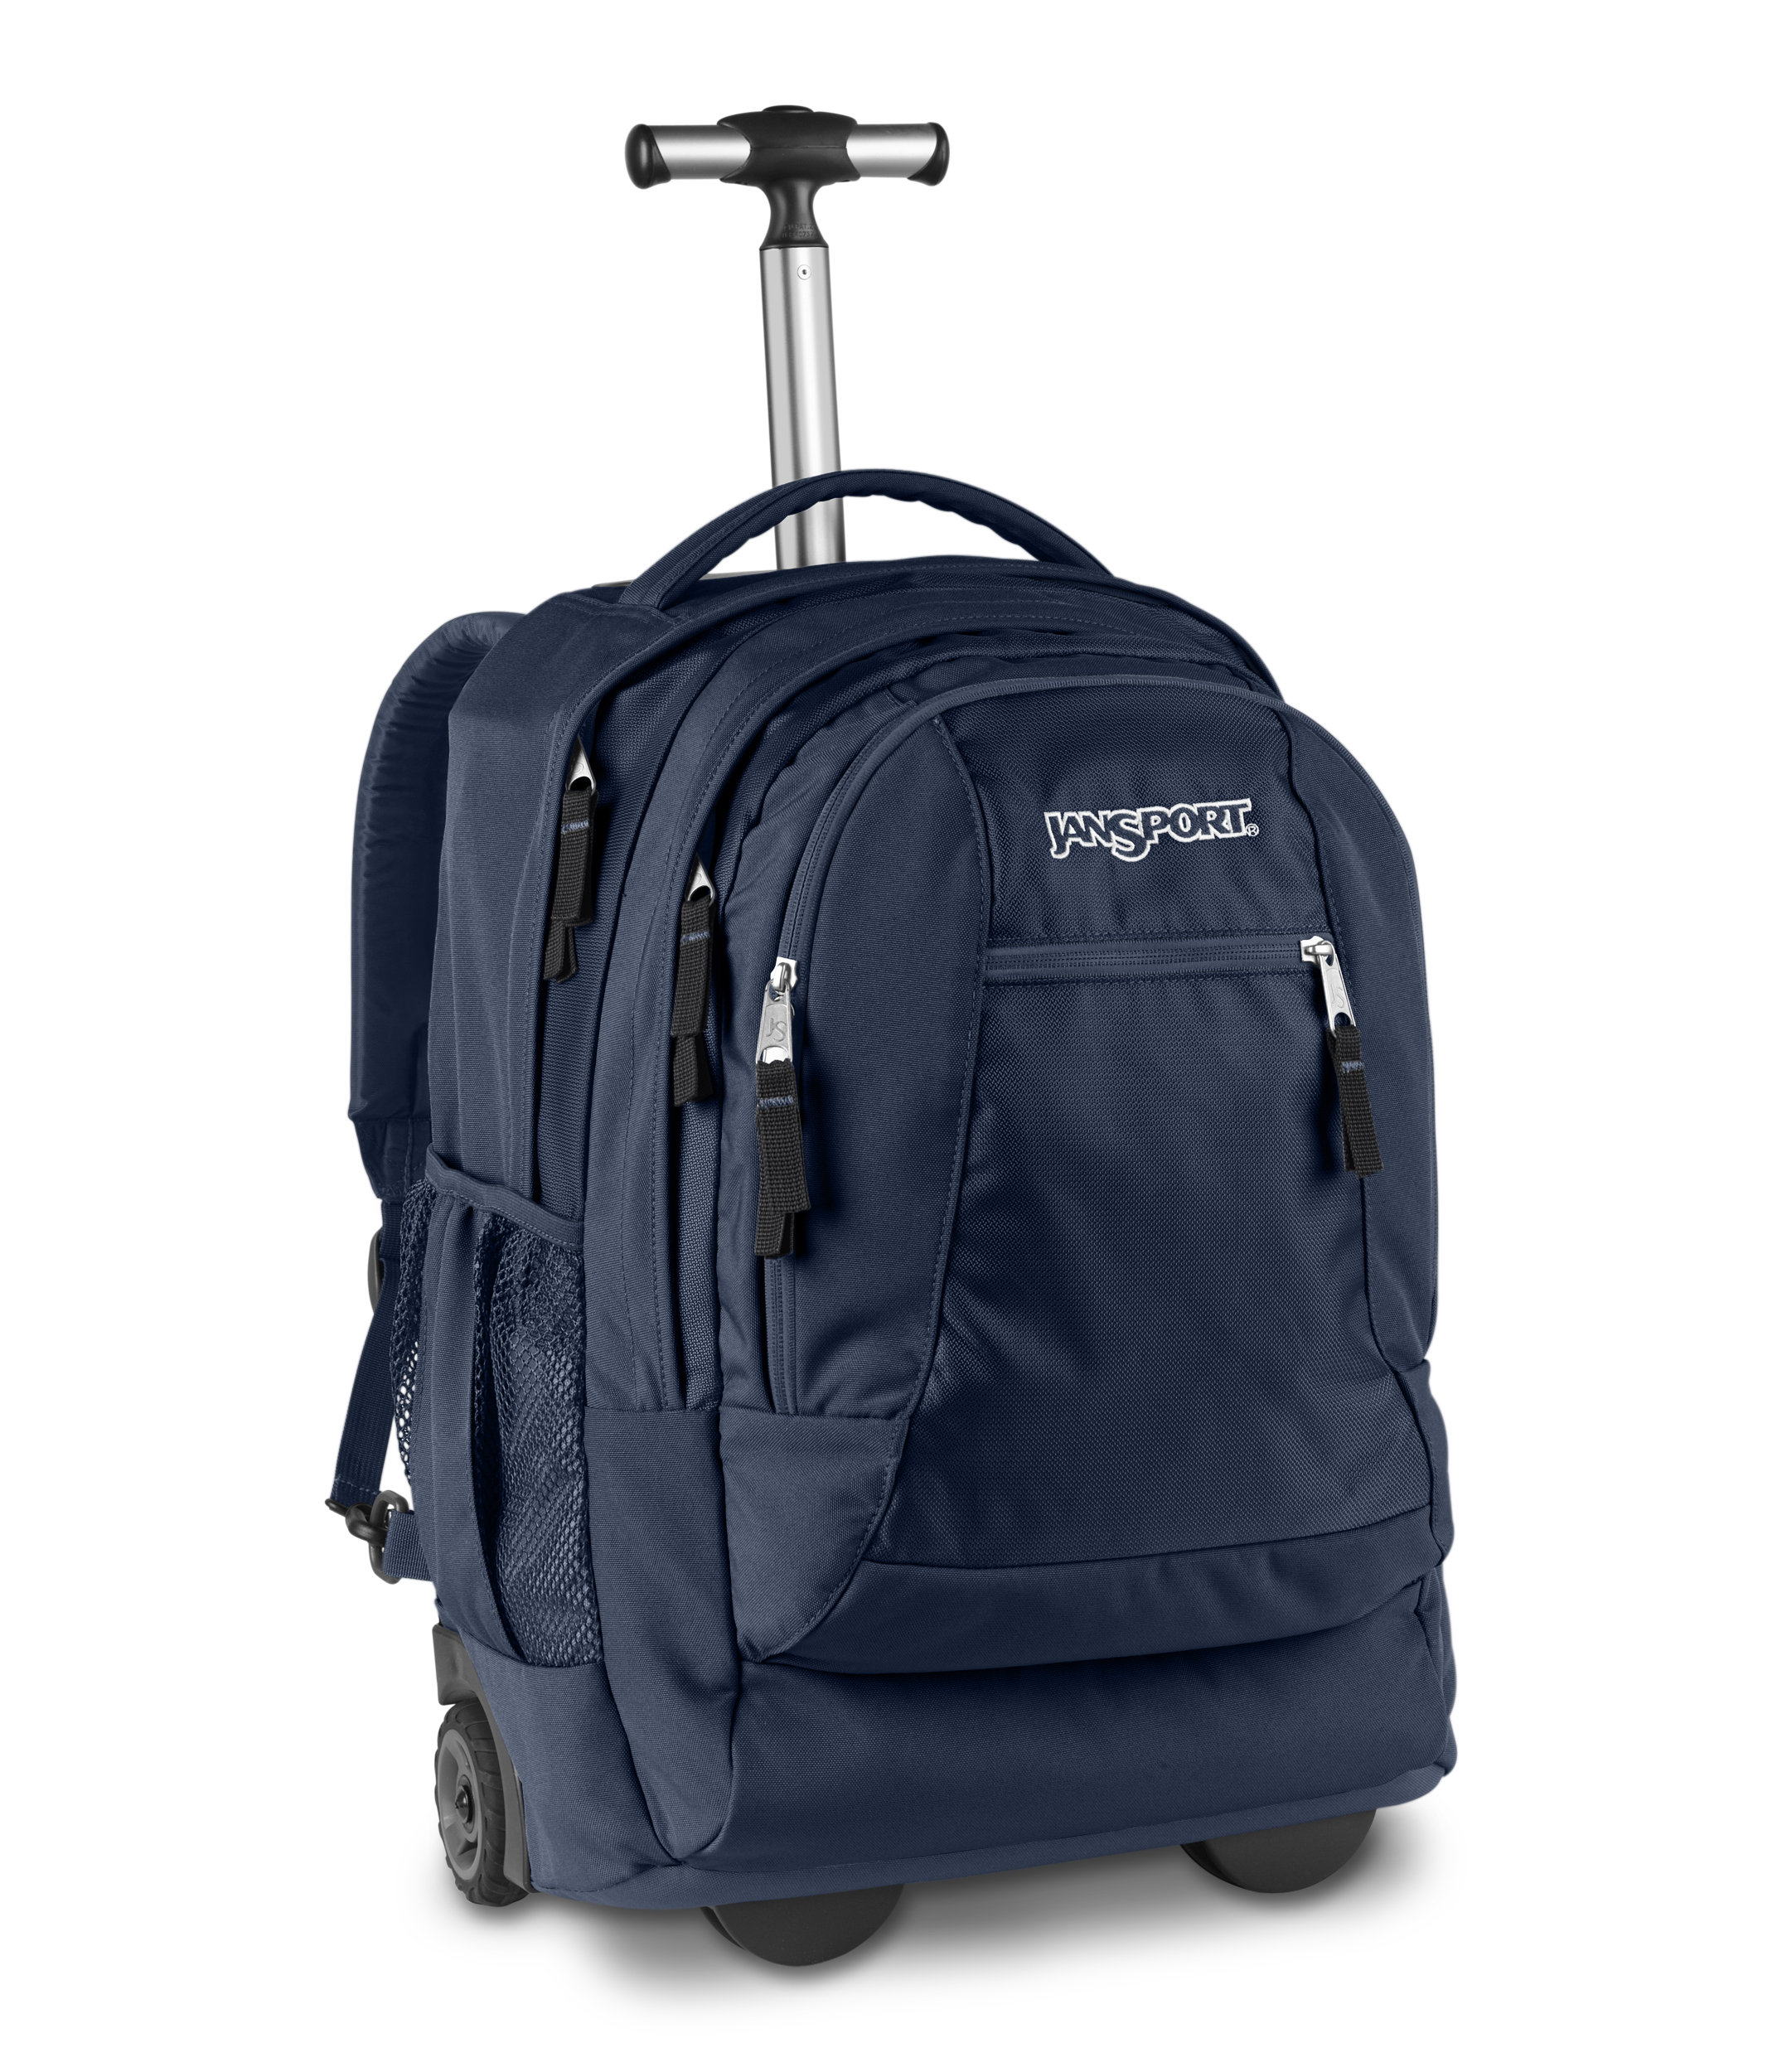 Rolling backpacks for teens